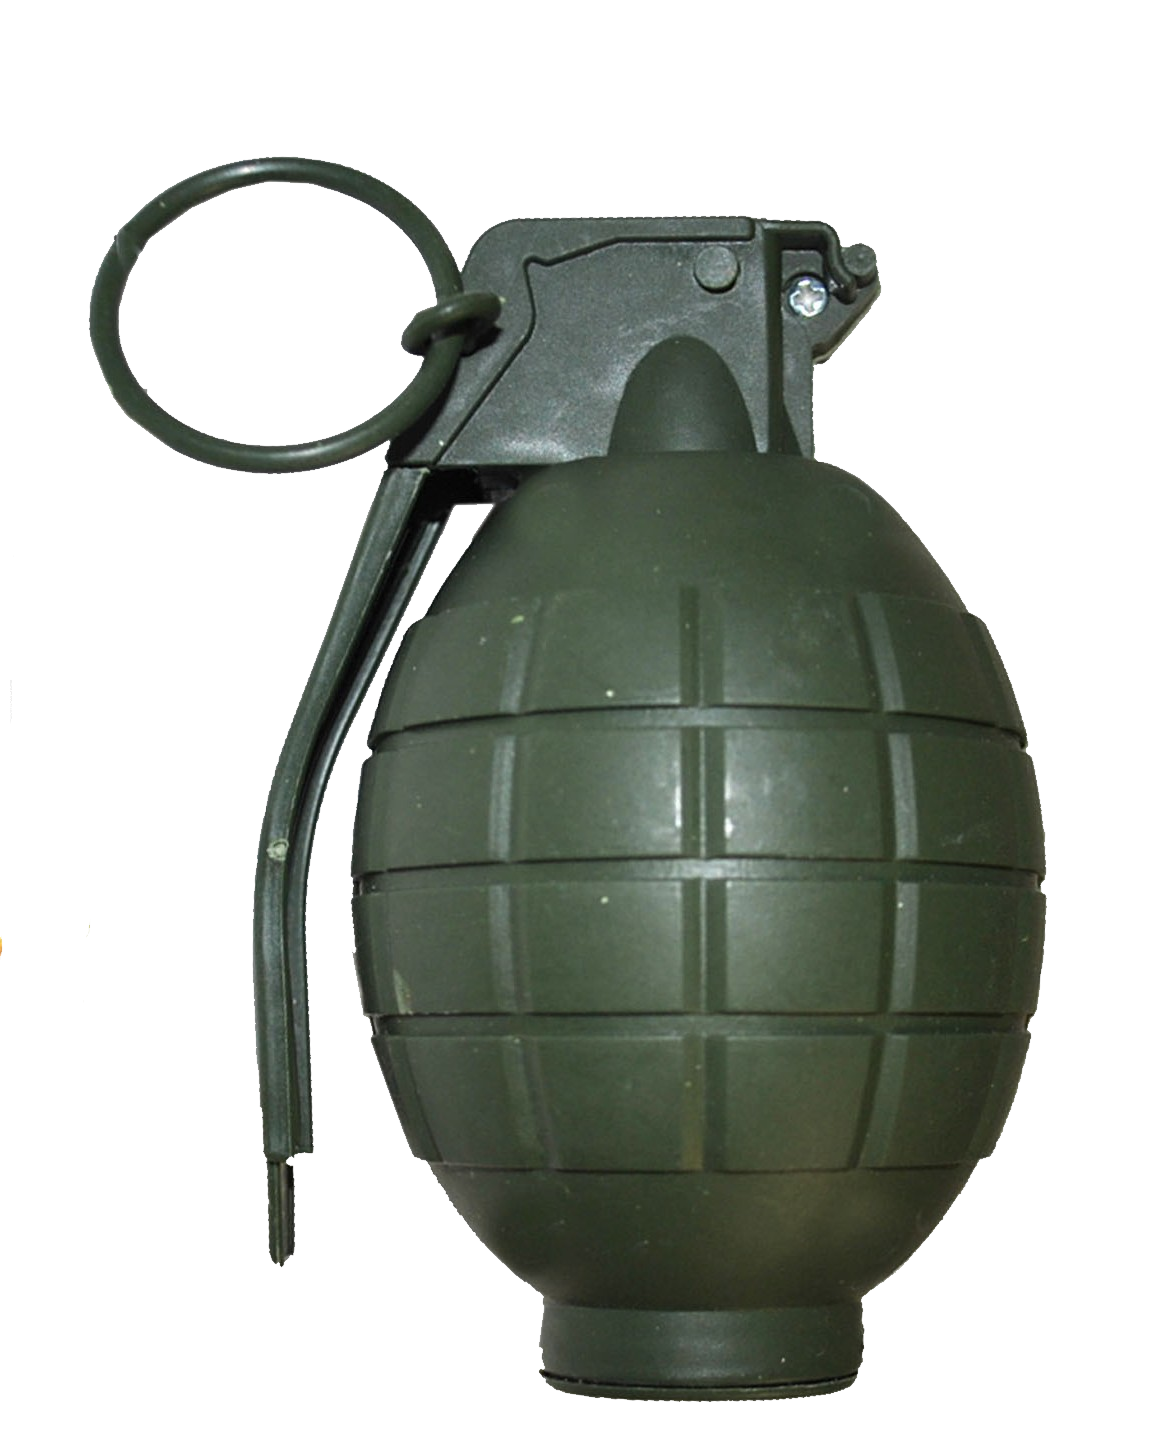 Clipart explosion ww1 bomb. Weapons png images with